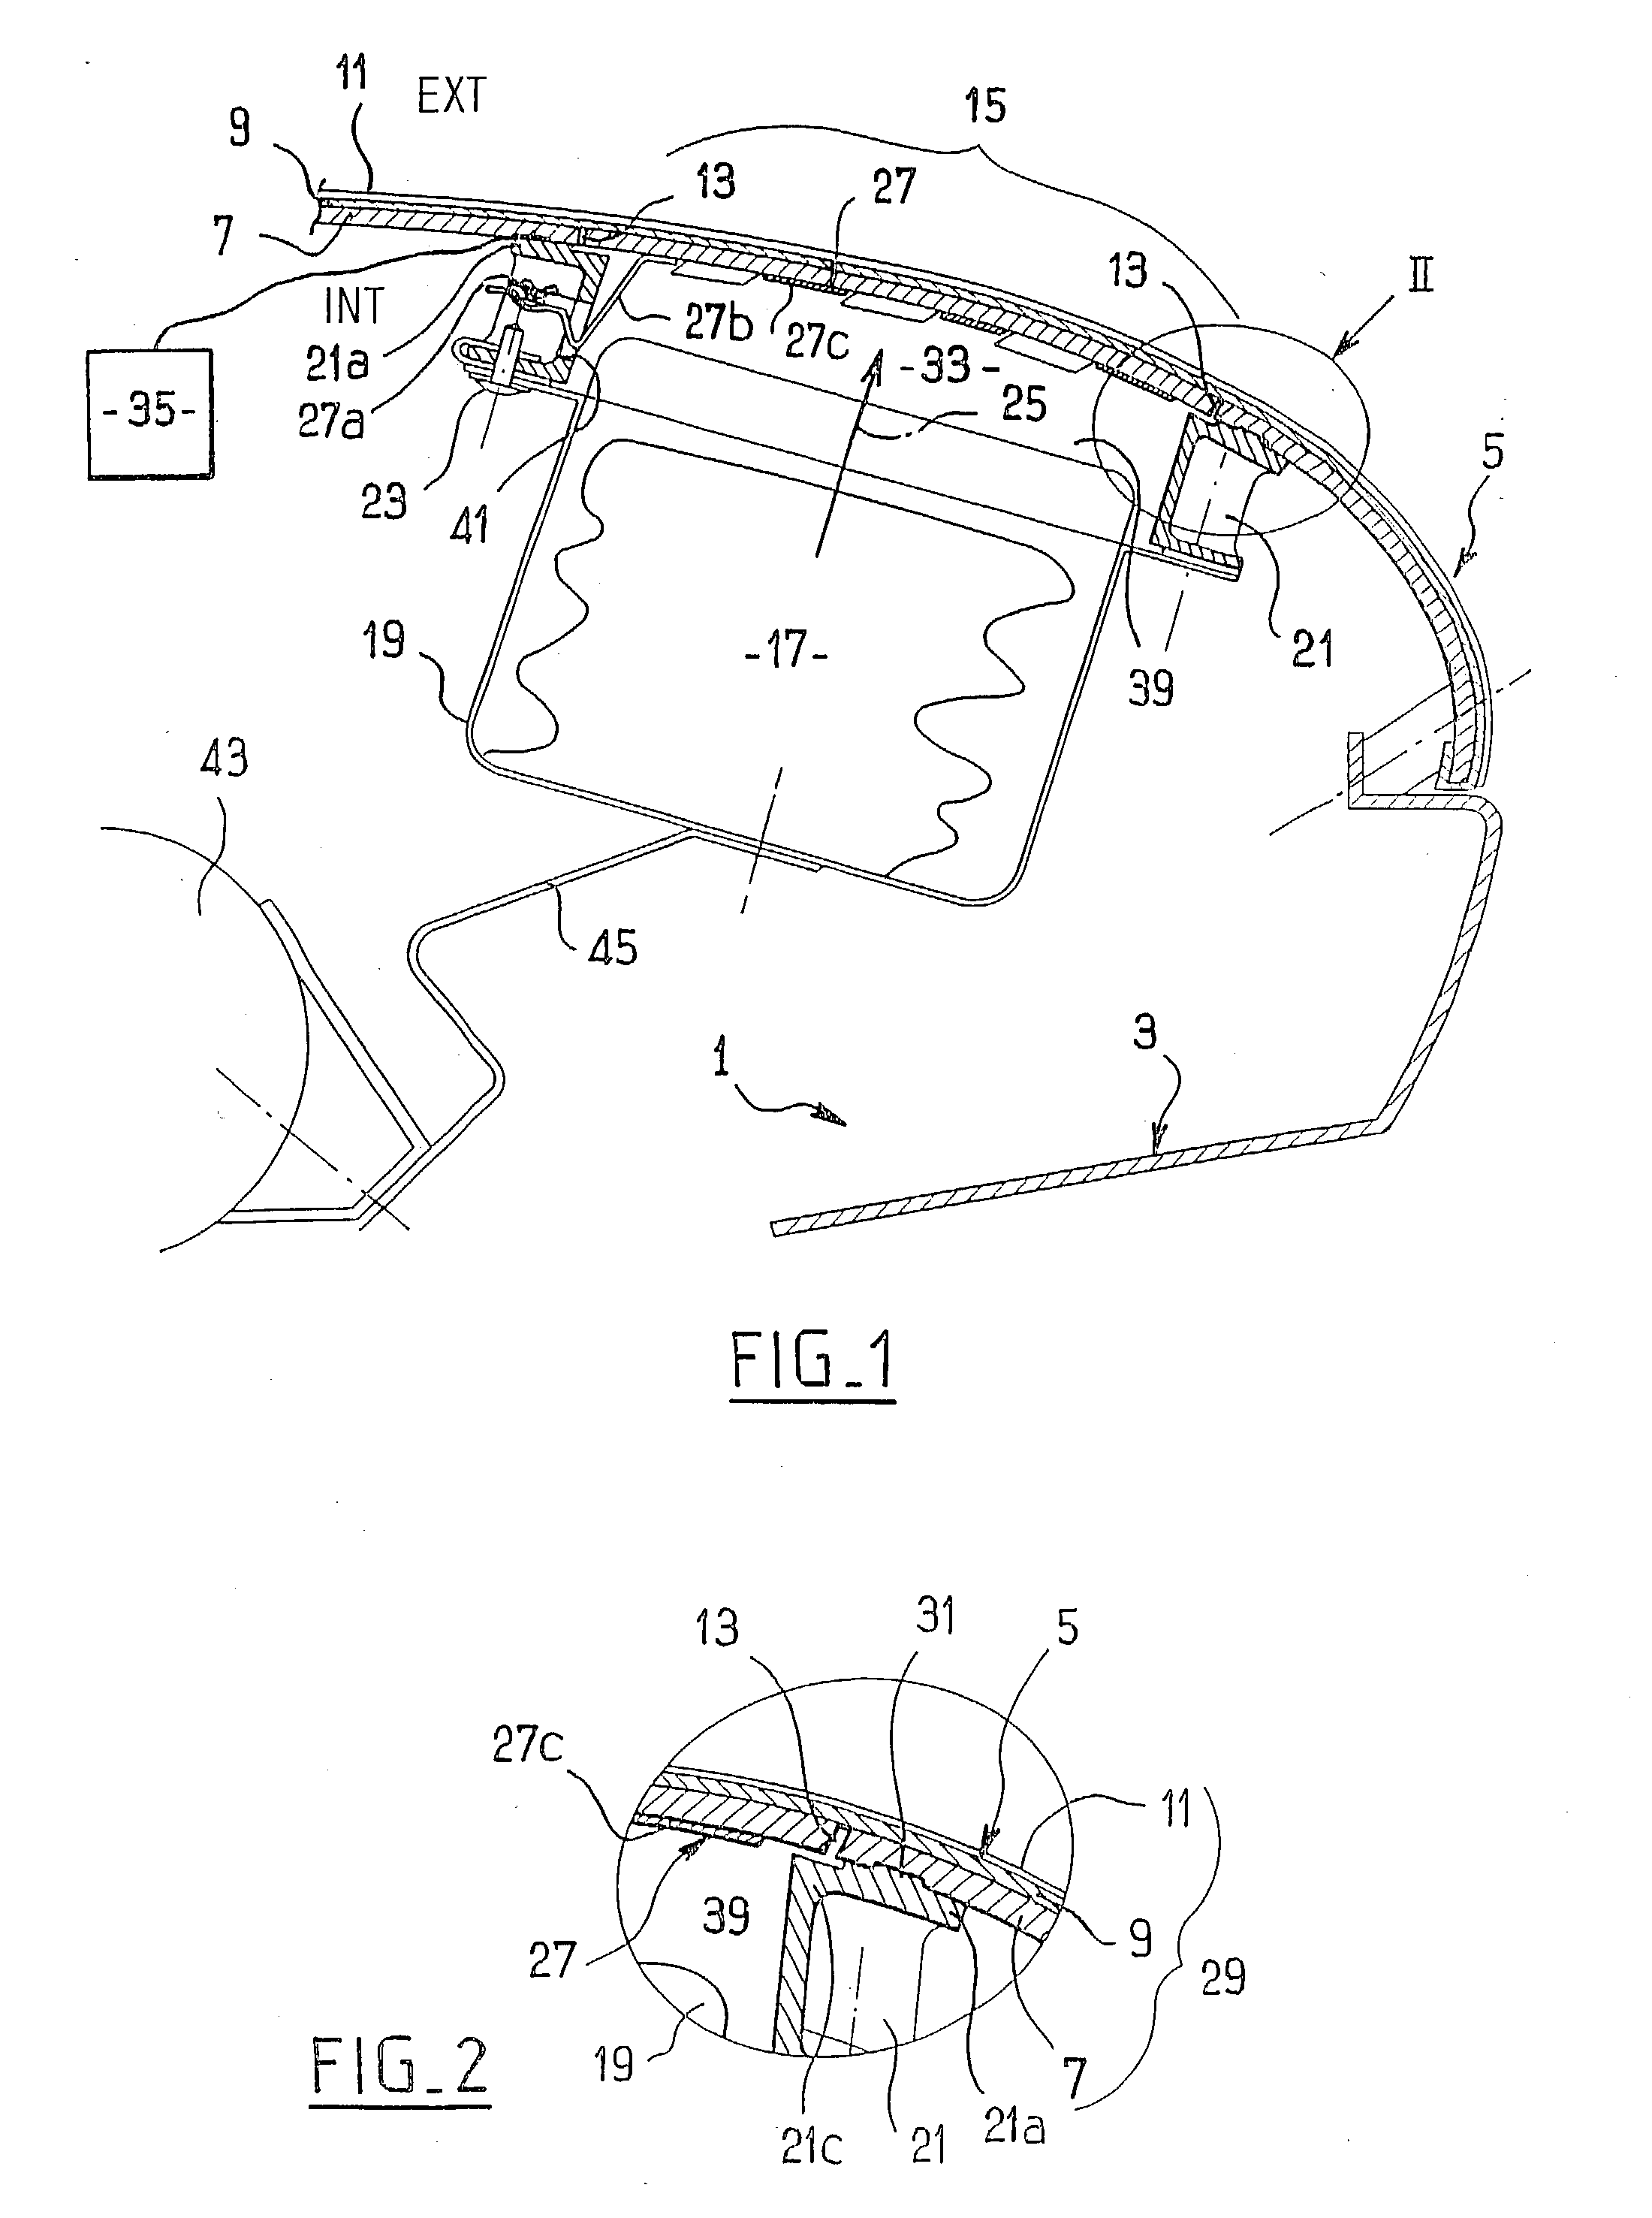 Method of manufacturing a dashboard portion fitted with an air bag